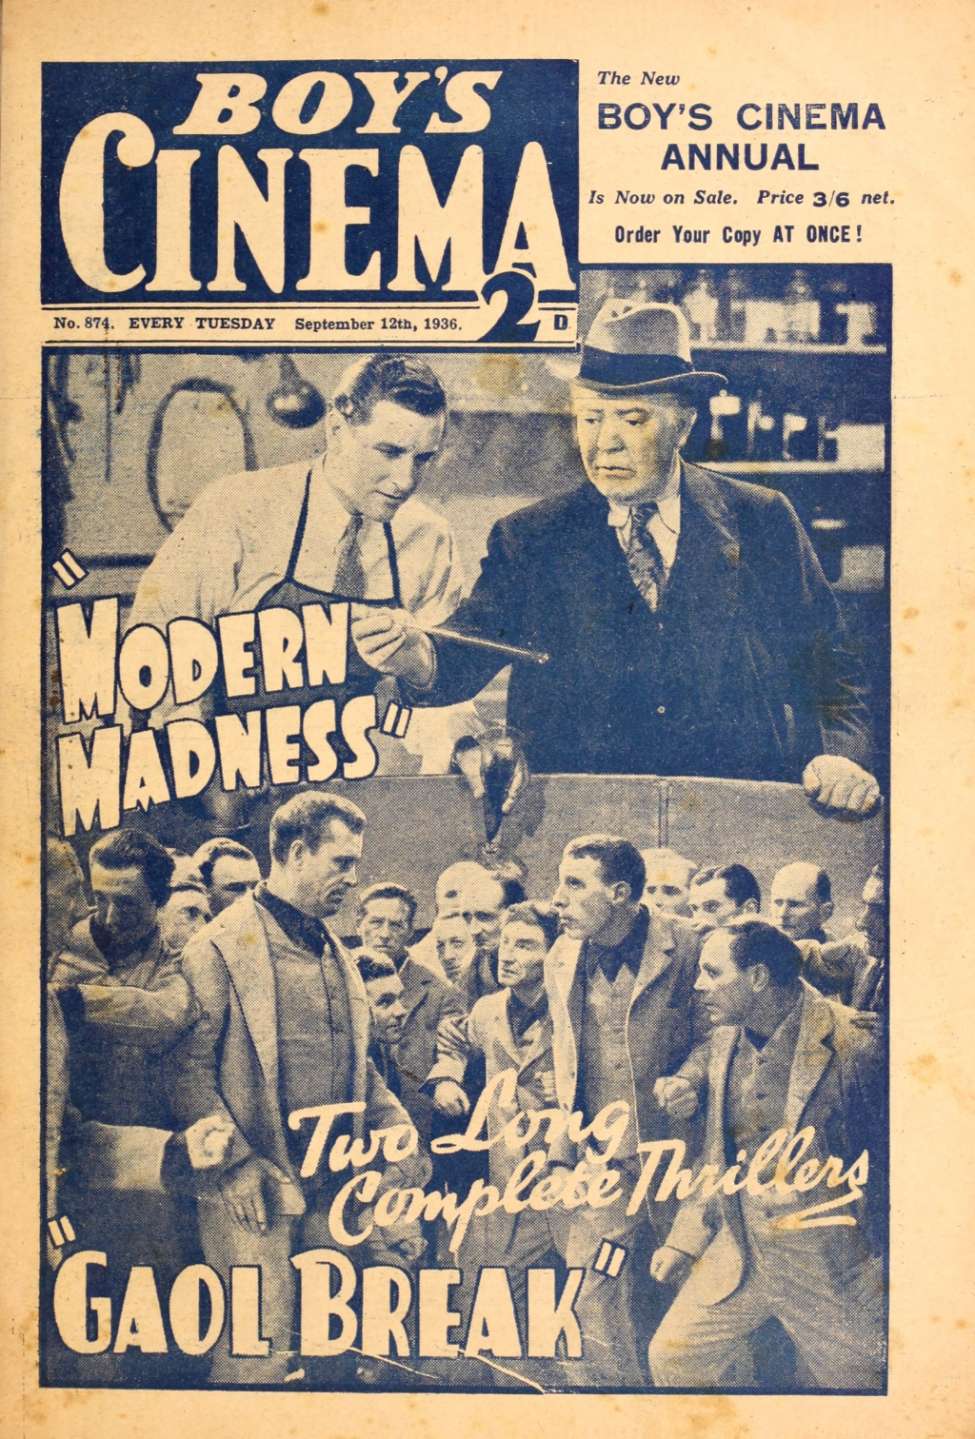 Comic Book Cover For Boy's Cinema 874 - Modern Madness - Guy Gibbee